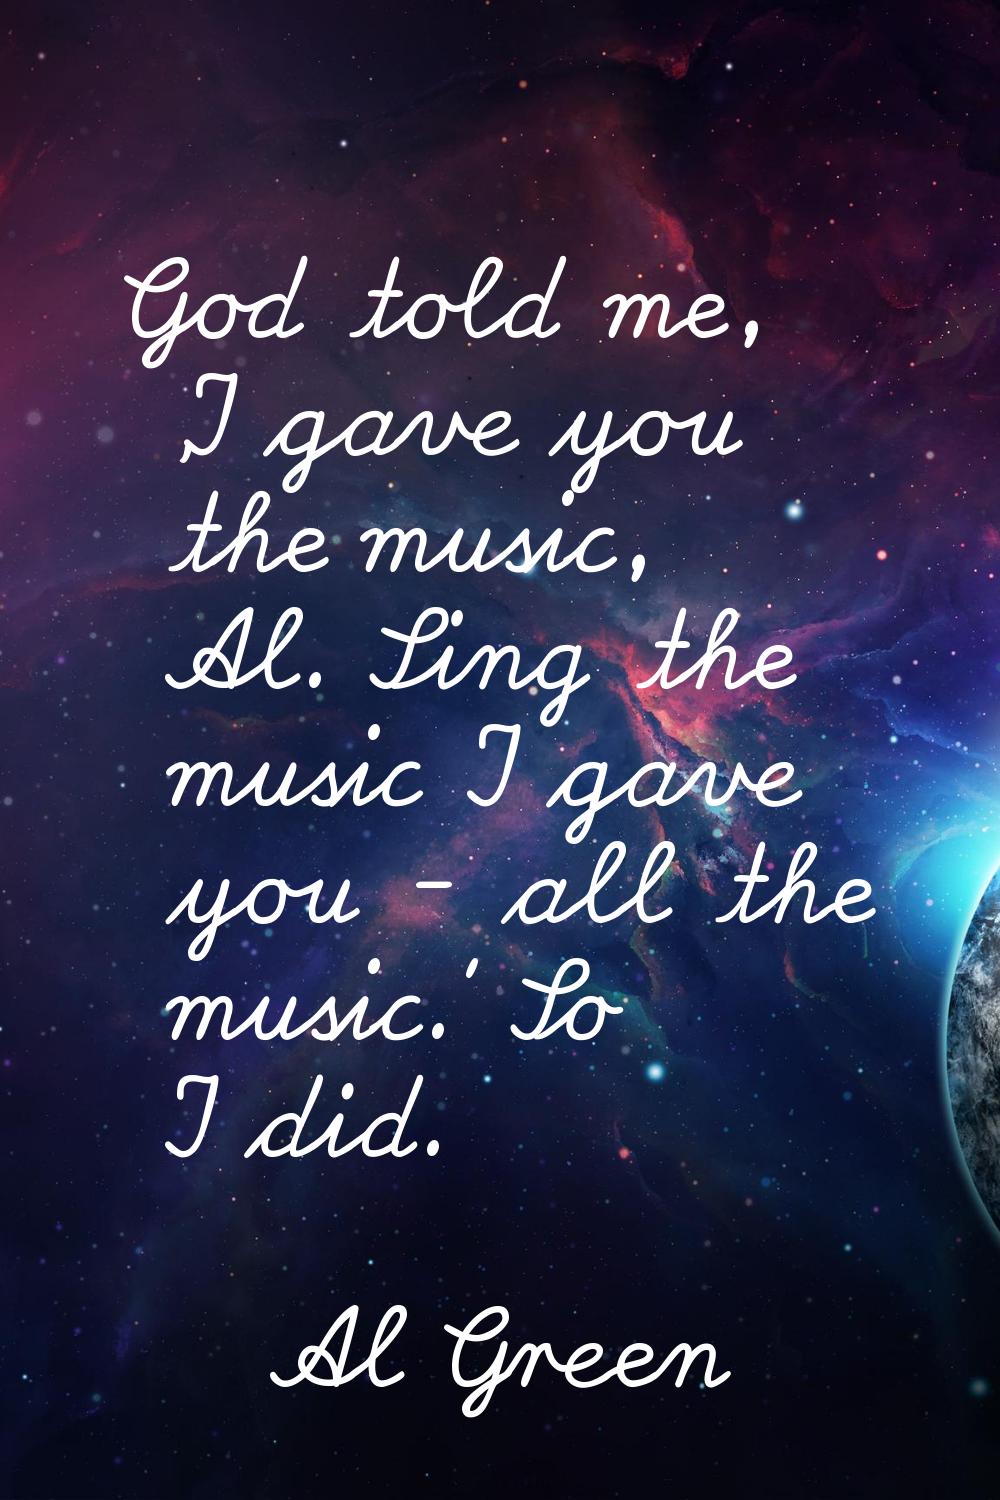 God told me, 'I gave you the music, Al. Sing the music I gave you - all the music.' So I did.